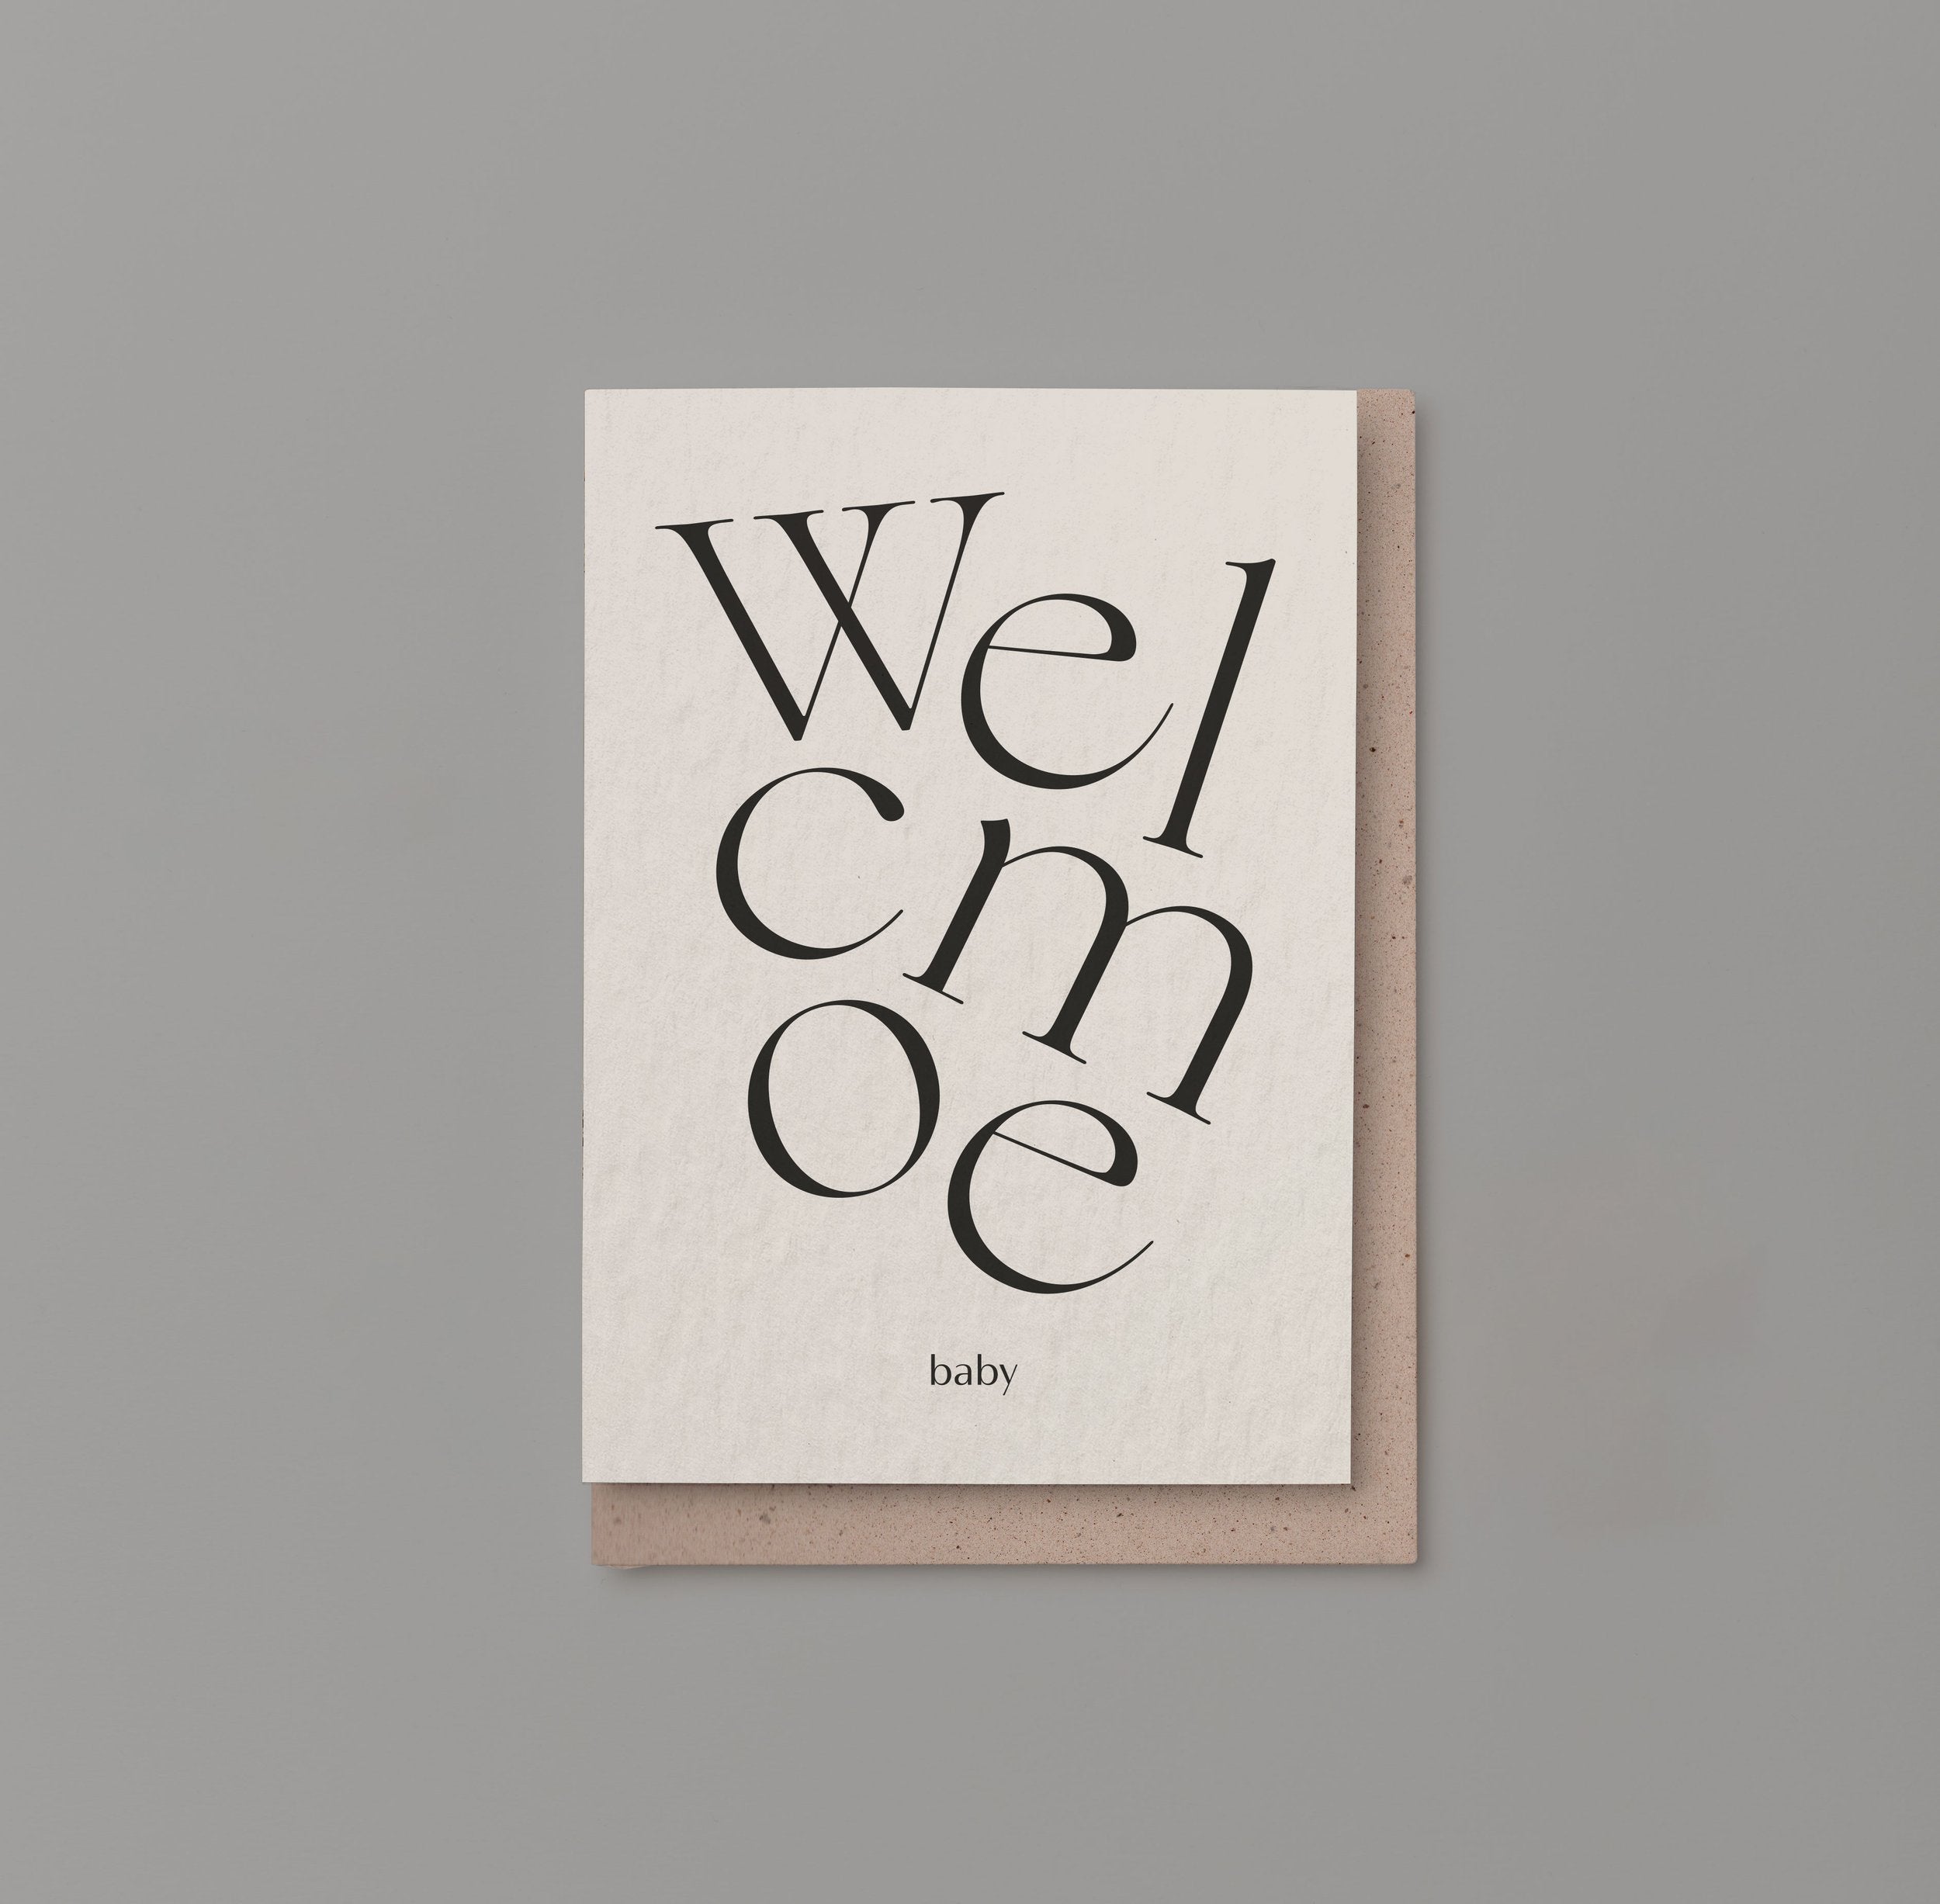 WELCOME BABY | CARD BY KINSHIPPED